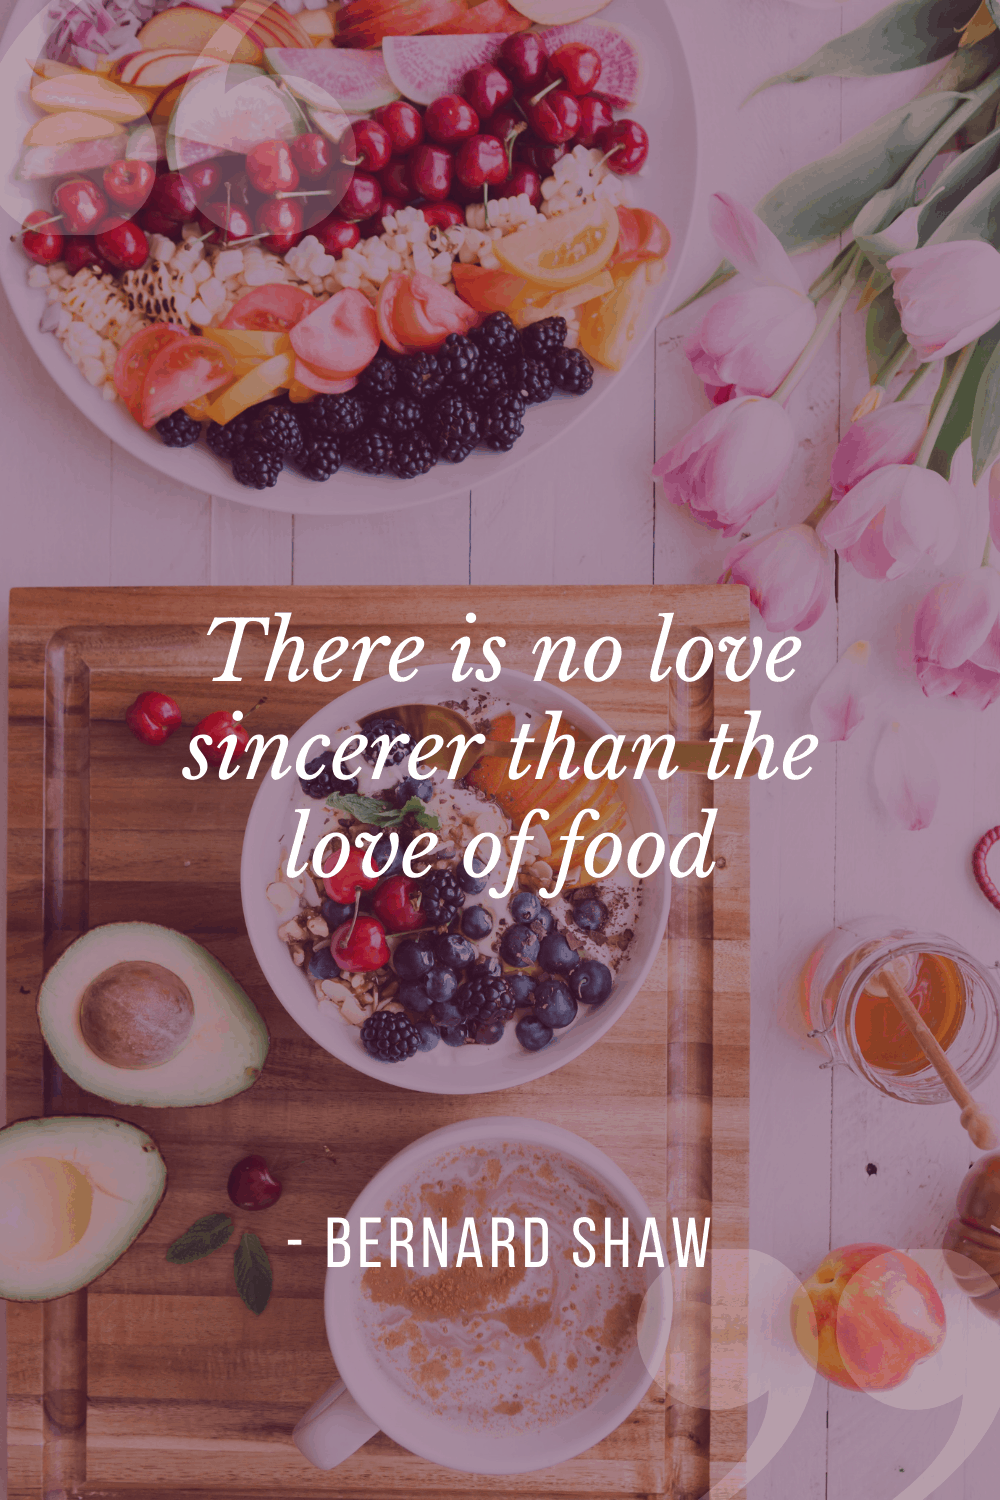 “There is no love sincerer than the love of food”, George Bernard Shaw